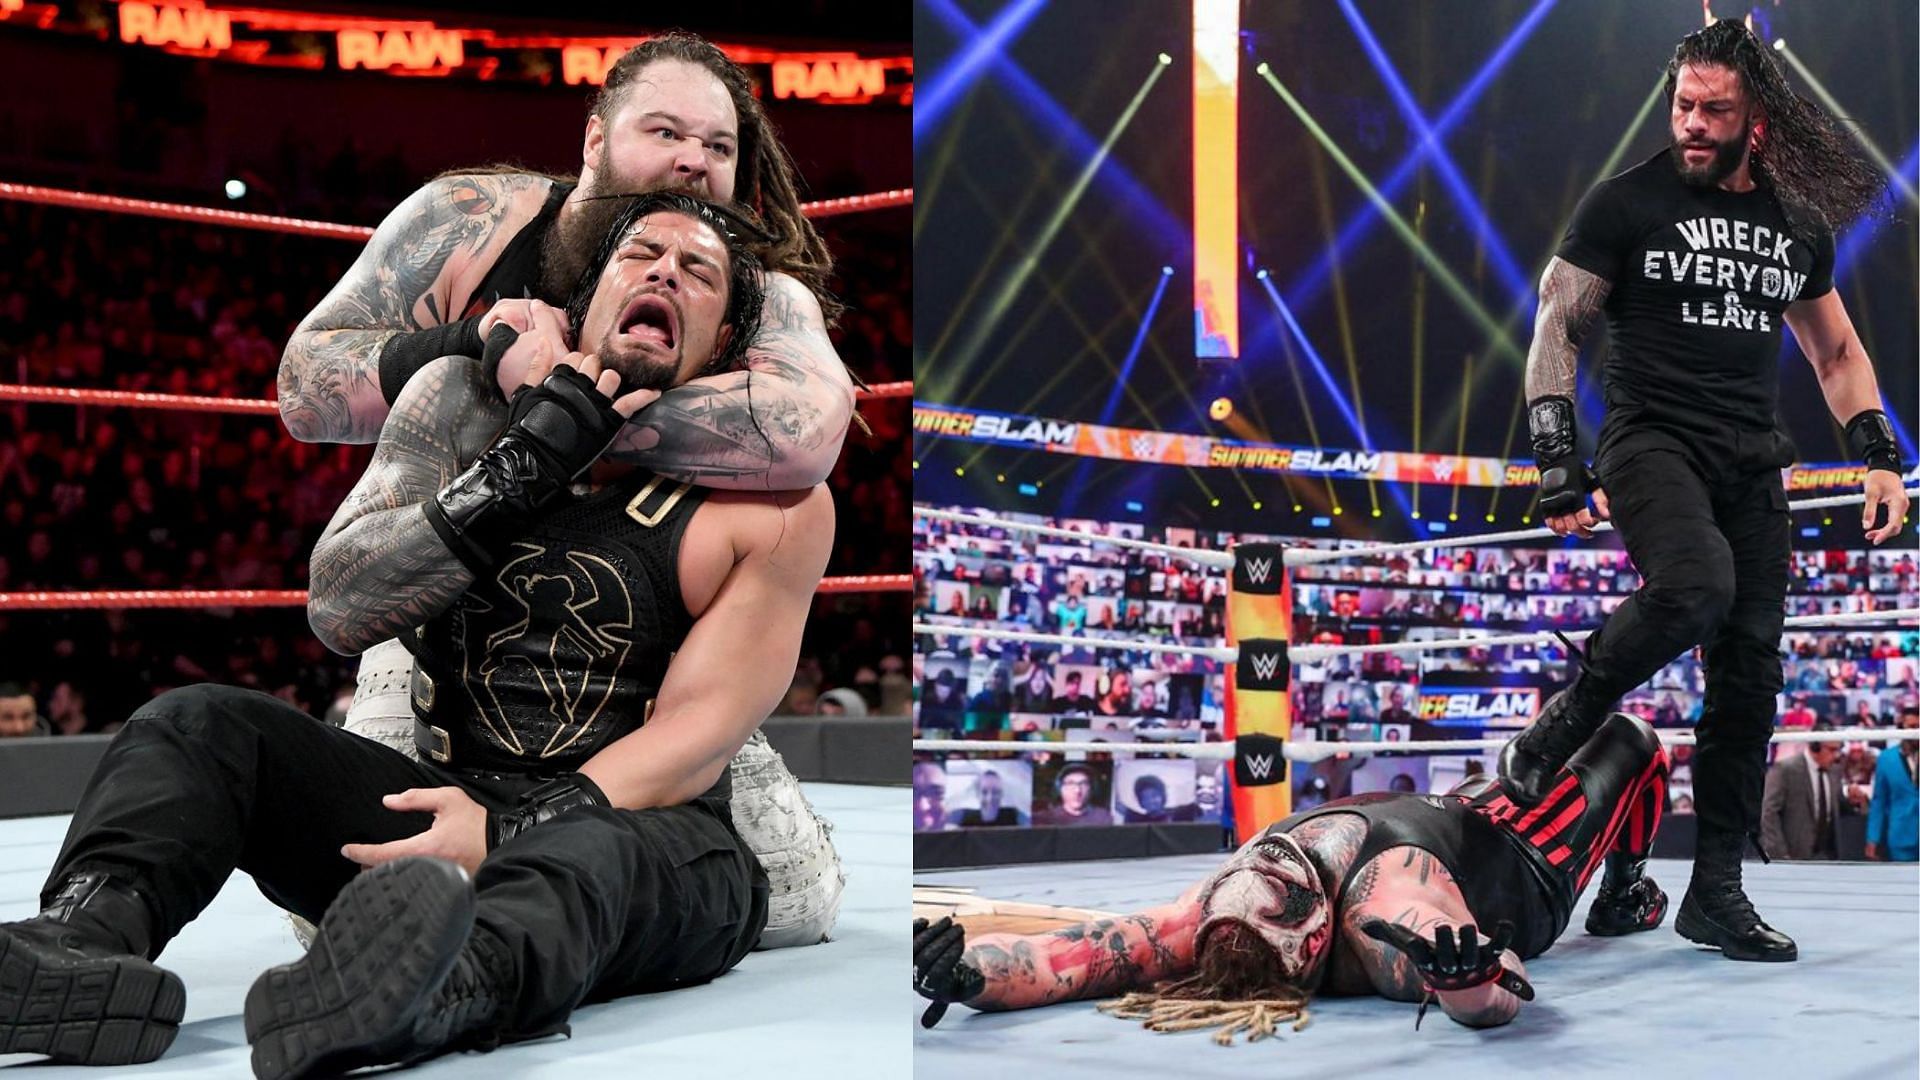 Bray Wyatt and Roman Reigns fought multiple times in the past